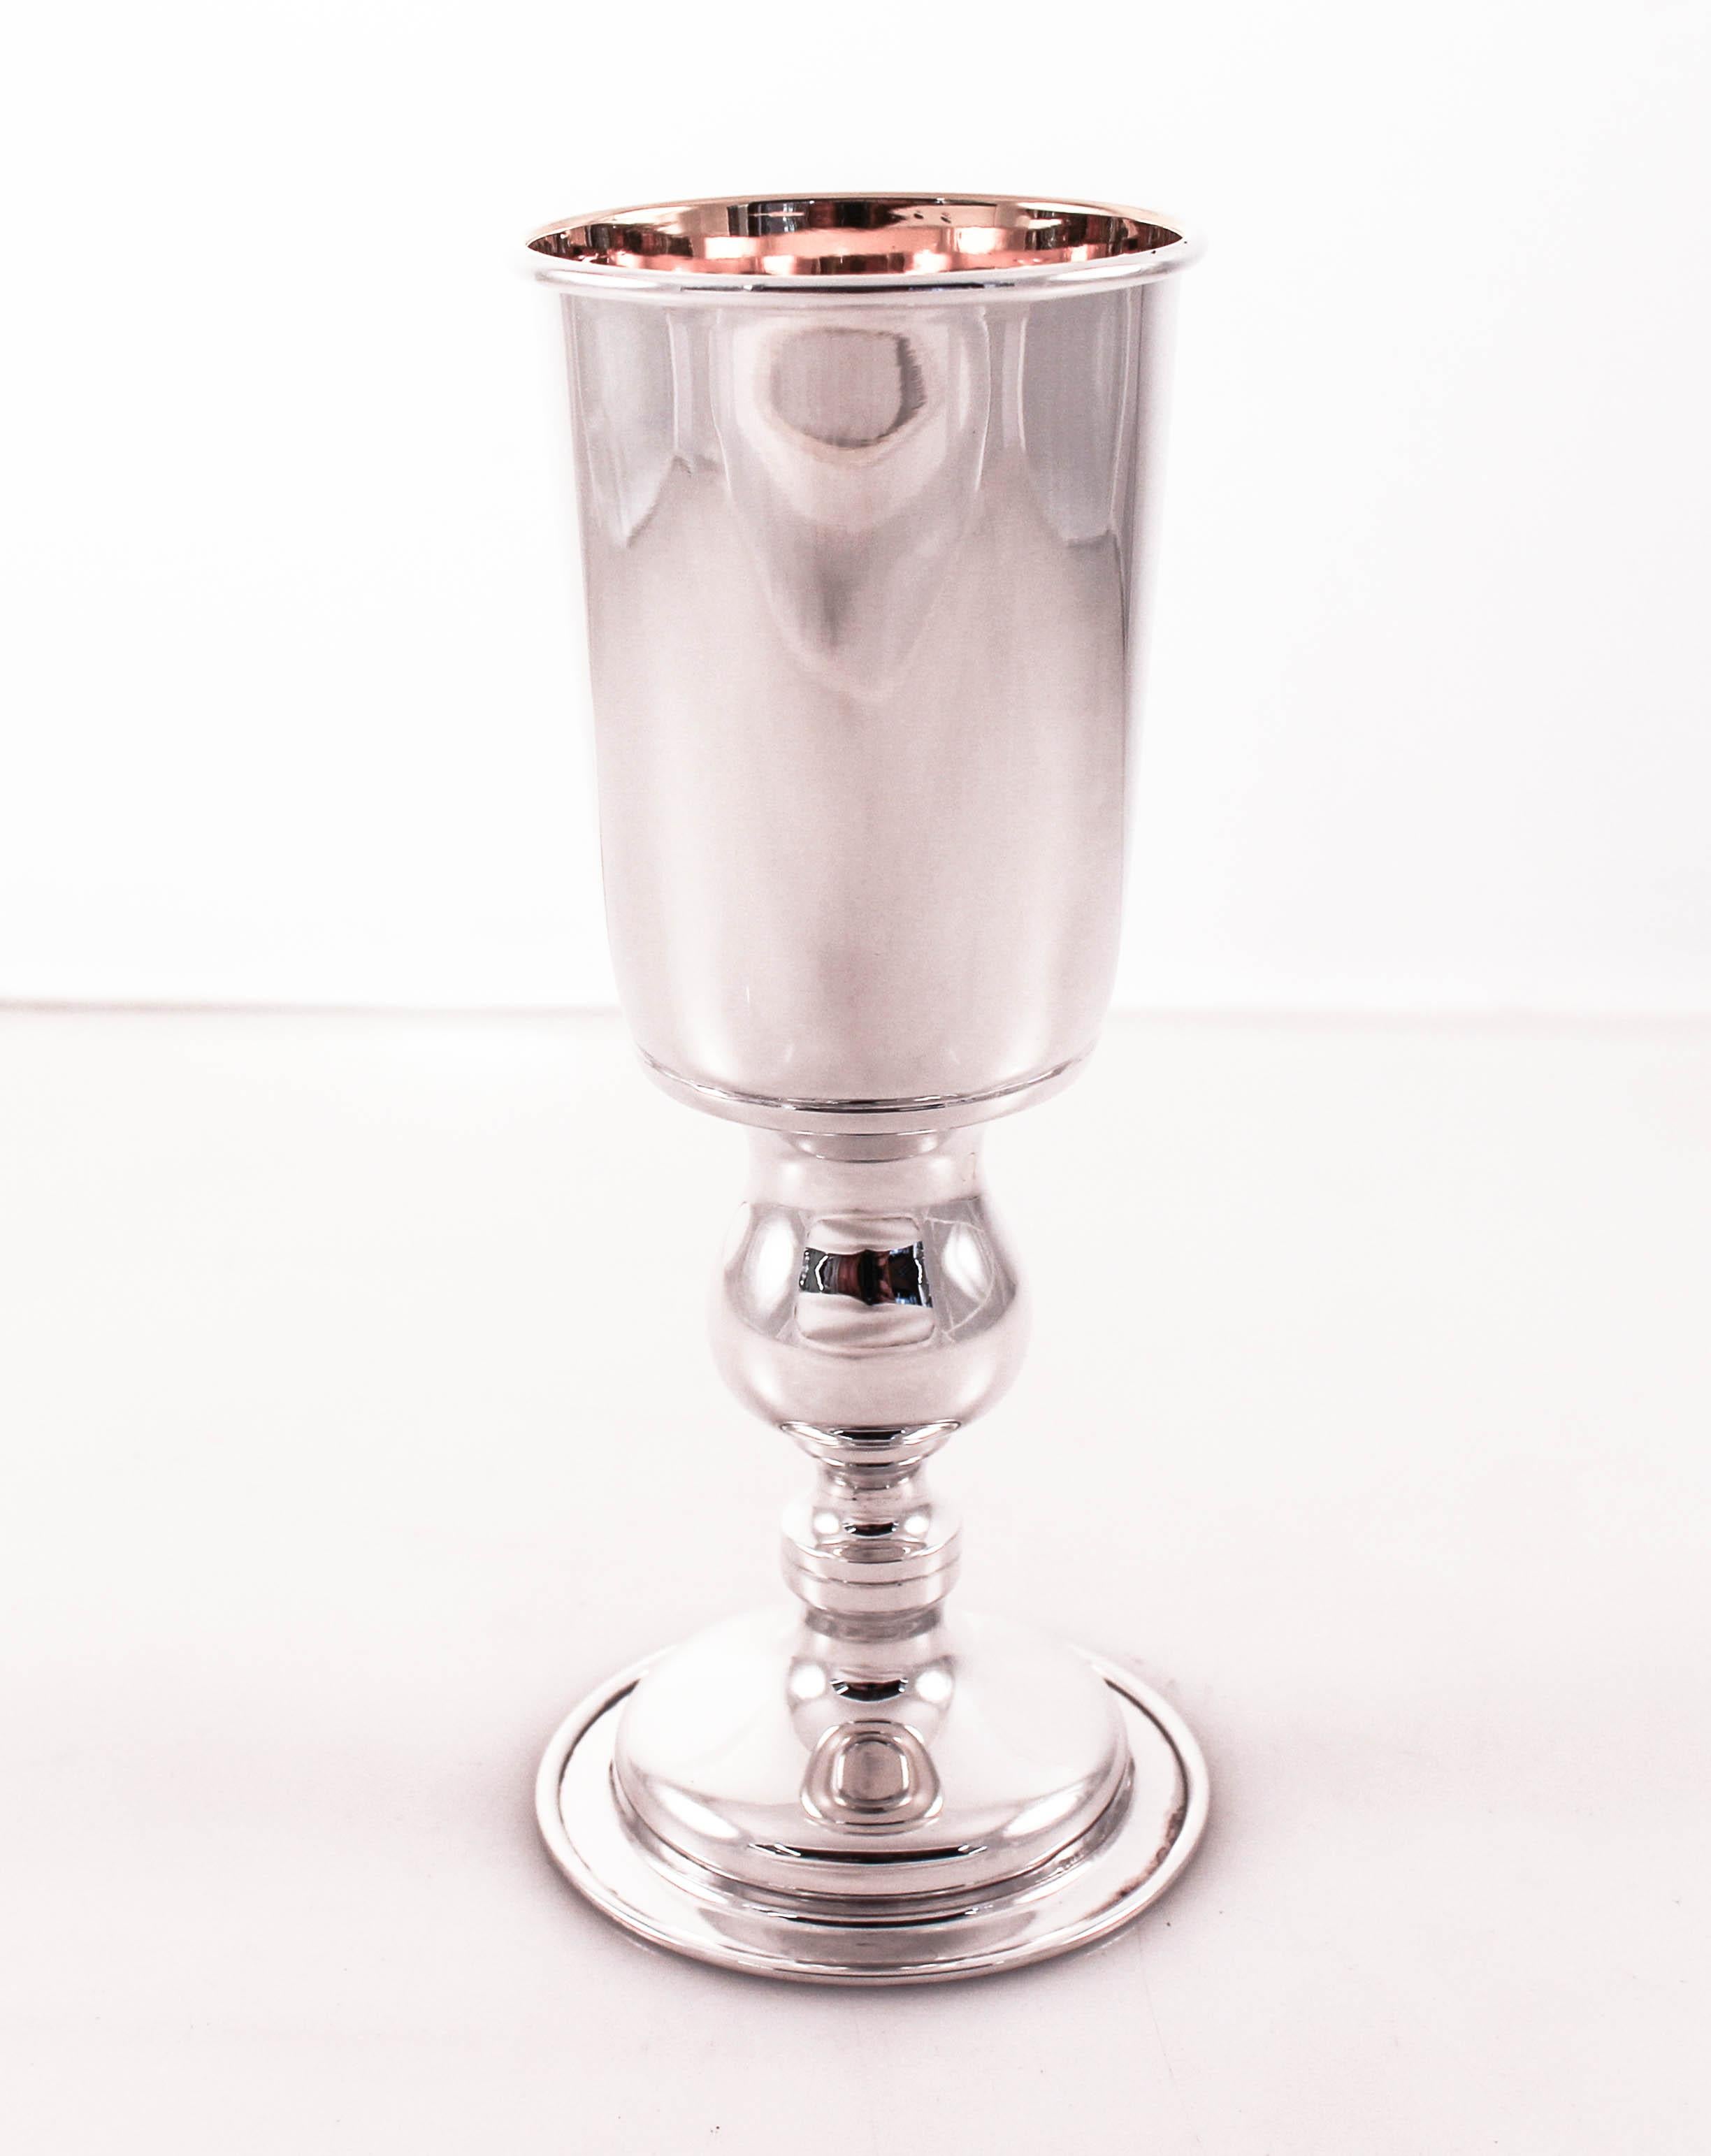 Here is a sterling silver goblet that’s fit for a king... or queen! Standing tall and regal, it’s sophisticated and handsome. It is gold-washed on the inside to protect the sterling.